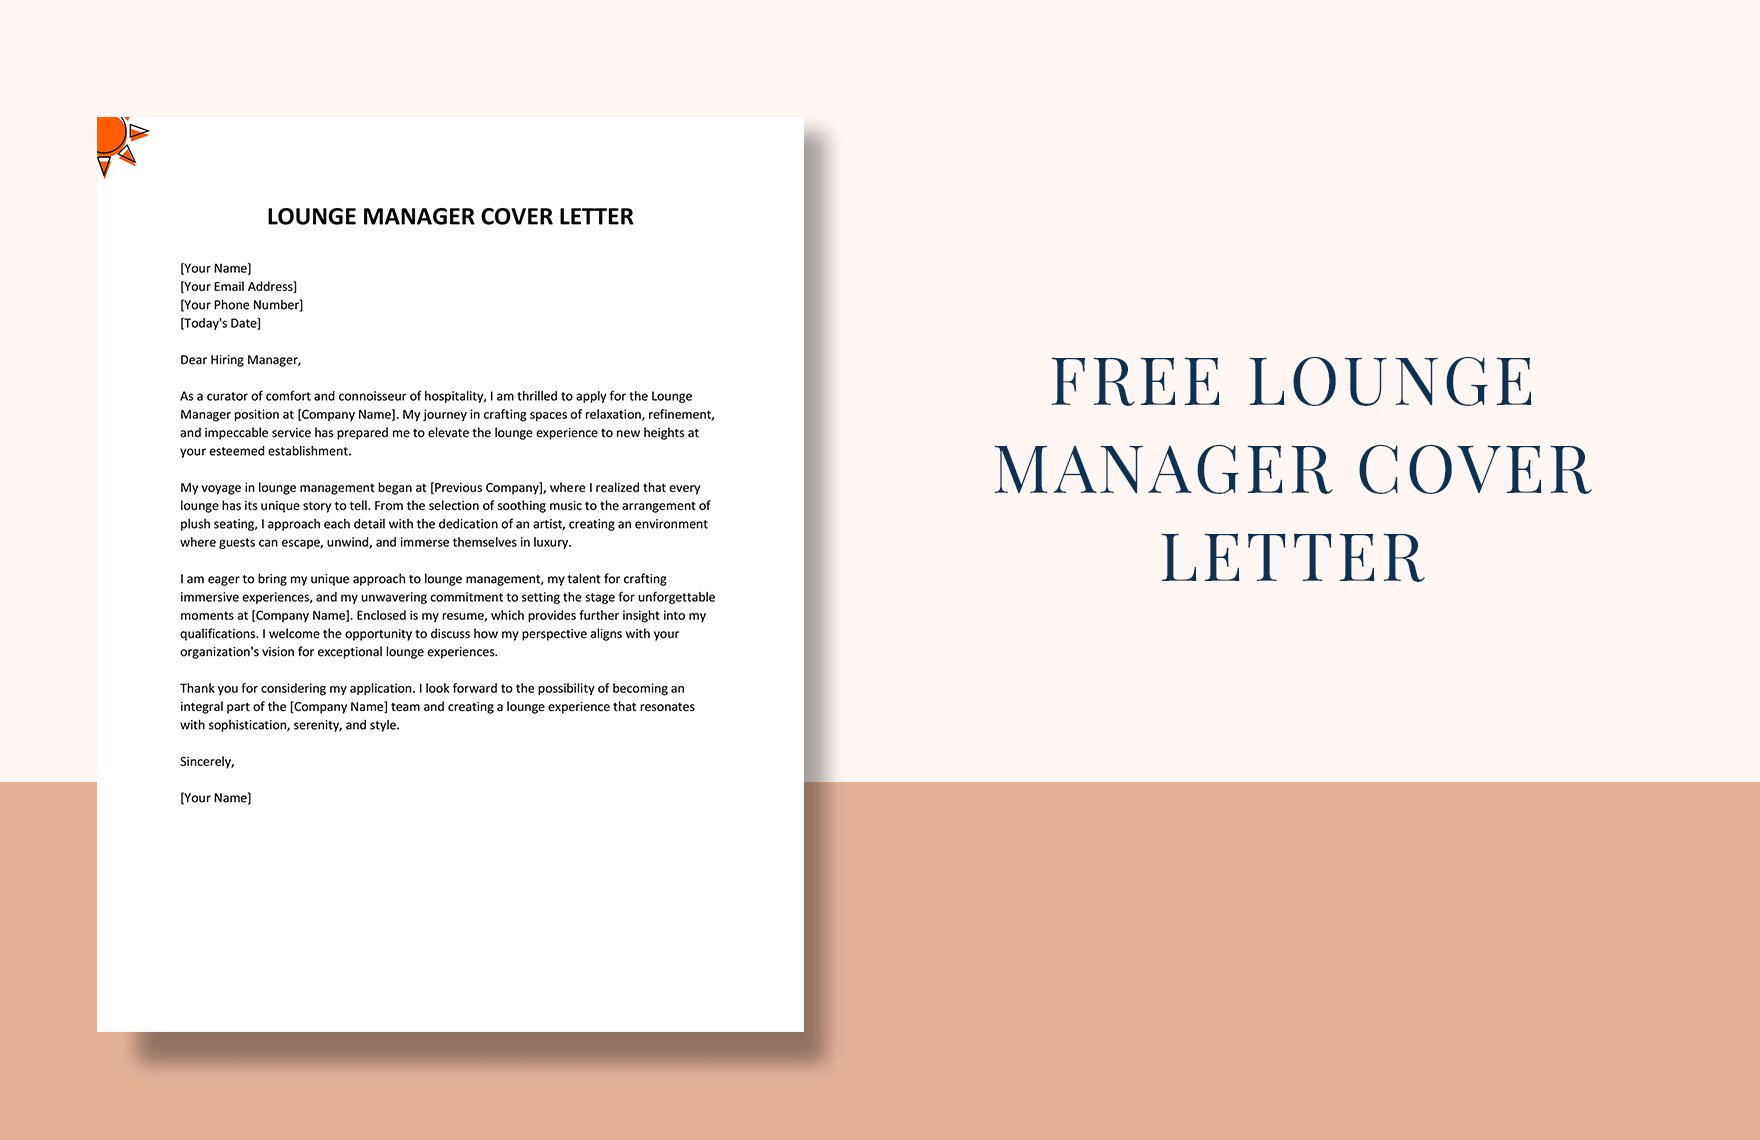 Lounge Manager Cover Letter